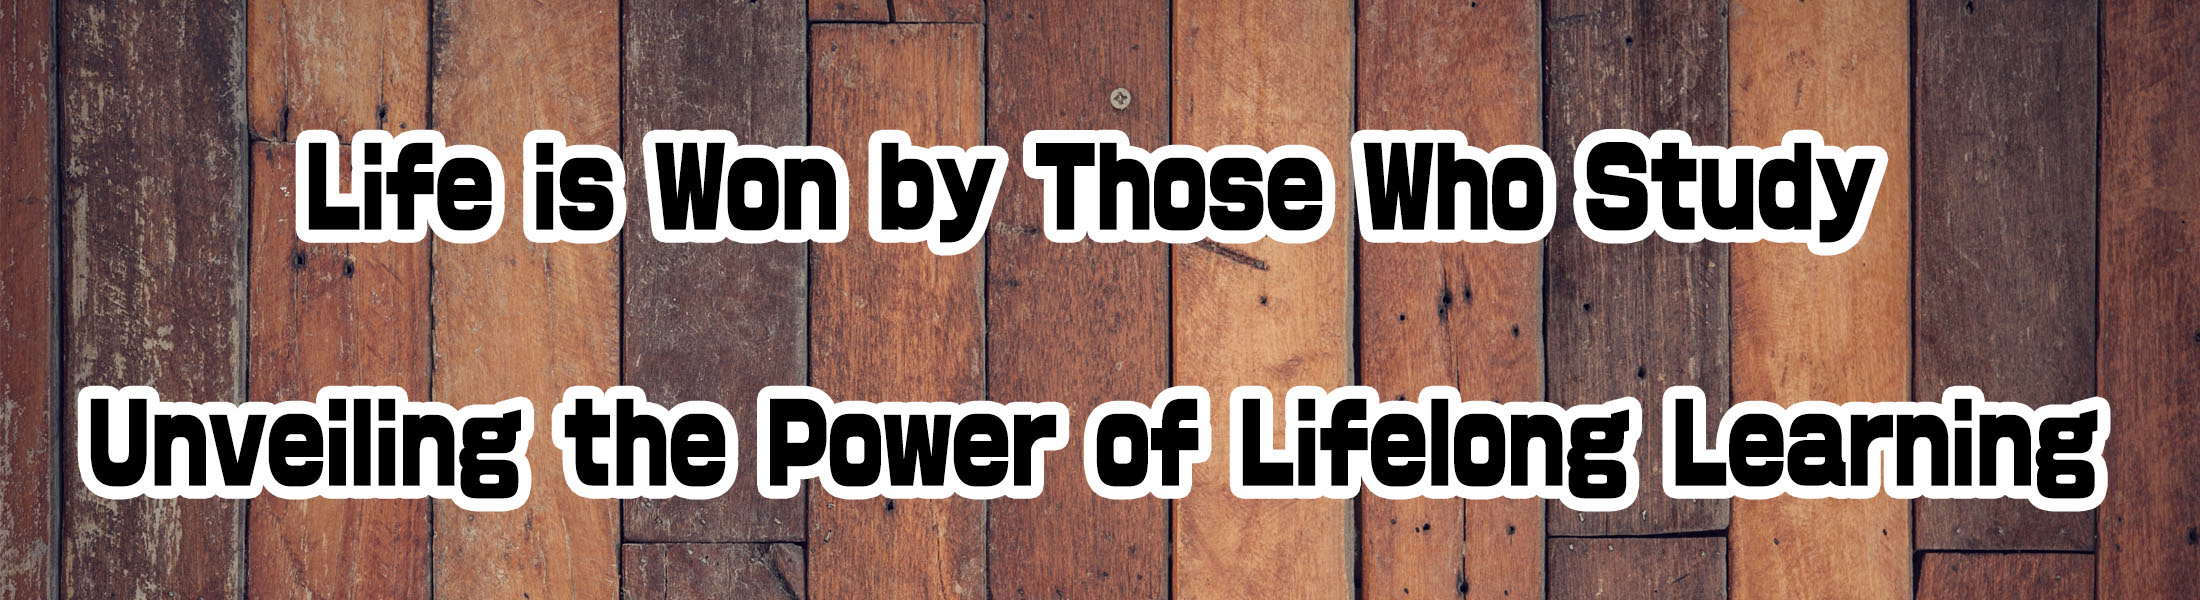 Life is Won by Those Who Study: Unveiling the Power of Lifelong Learning